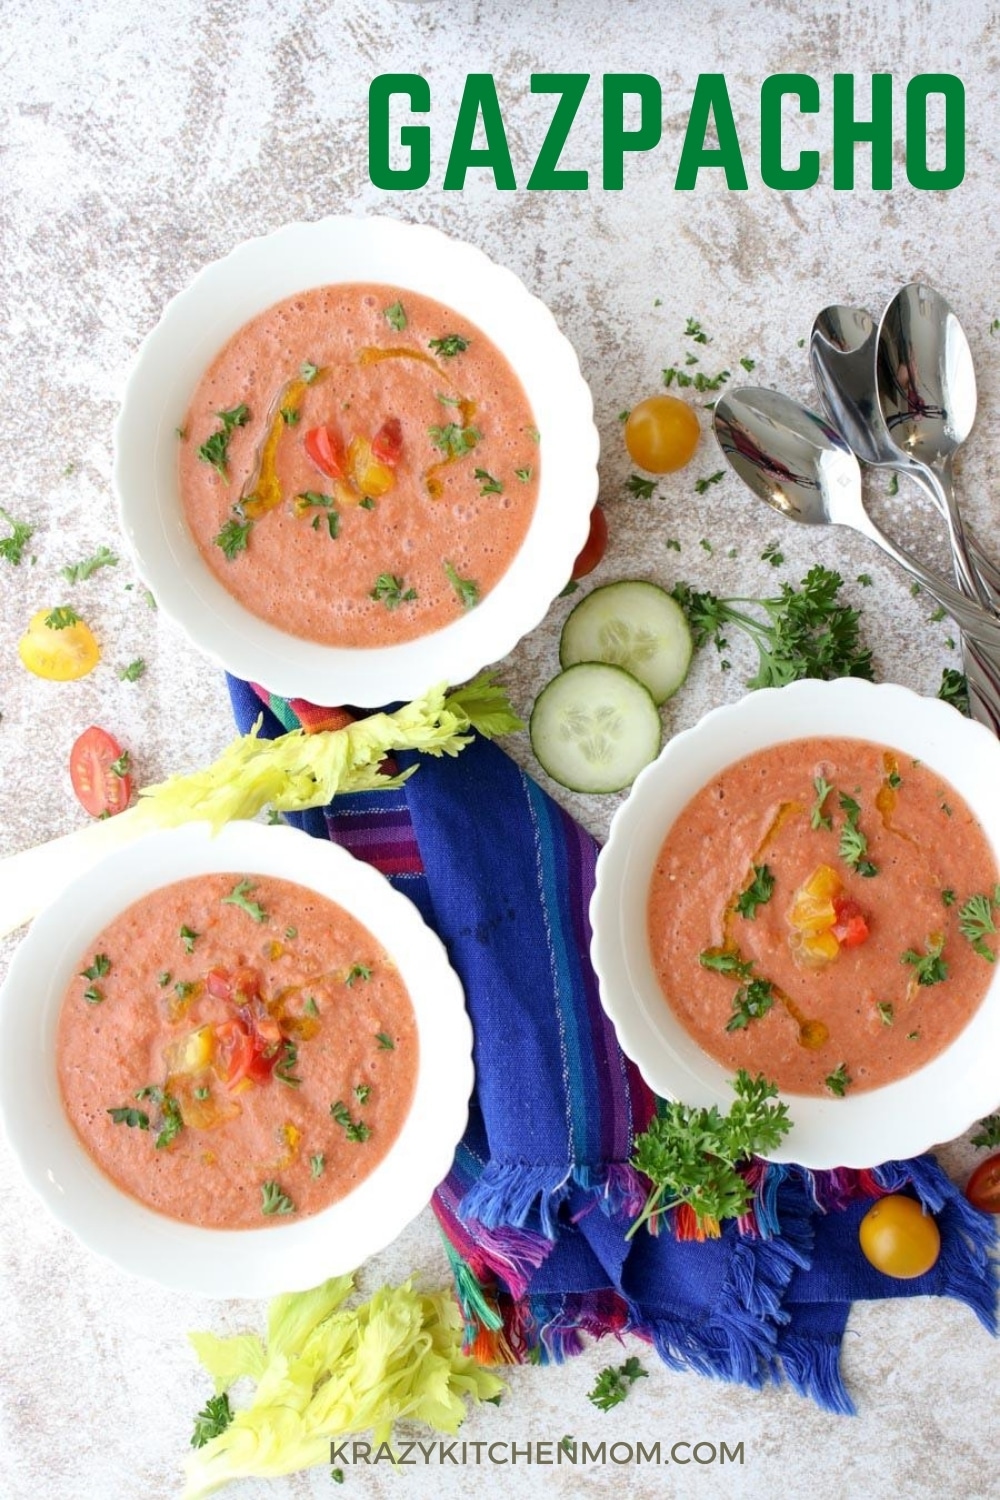 Ripe summer tomatoes are everywhere this time of the year. Grab your favorites and make my easy gazpacho recipes in minutes! It's fresh, cool, creamy, and simply a flavor explosion!  via @krazykitchenmom